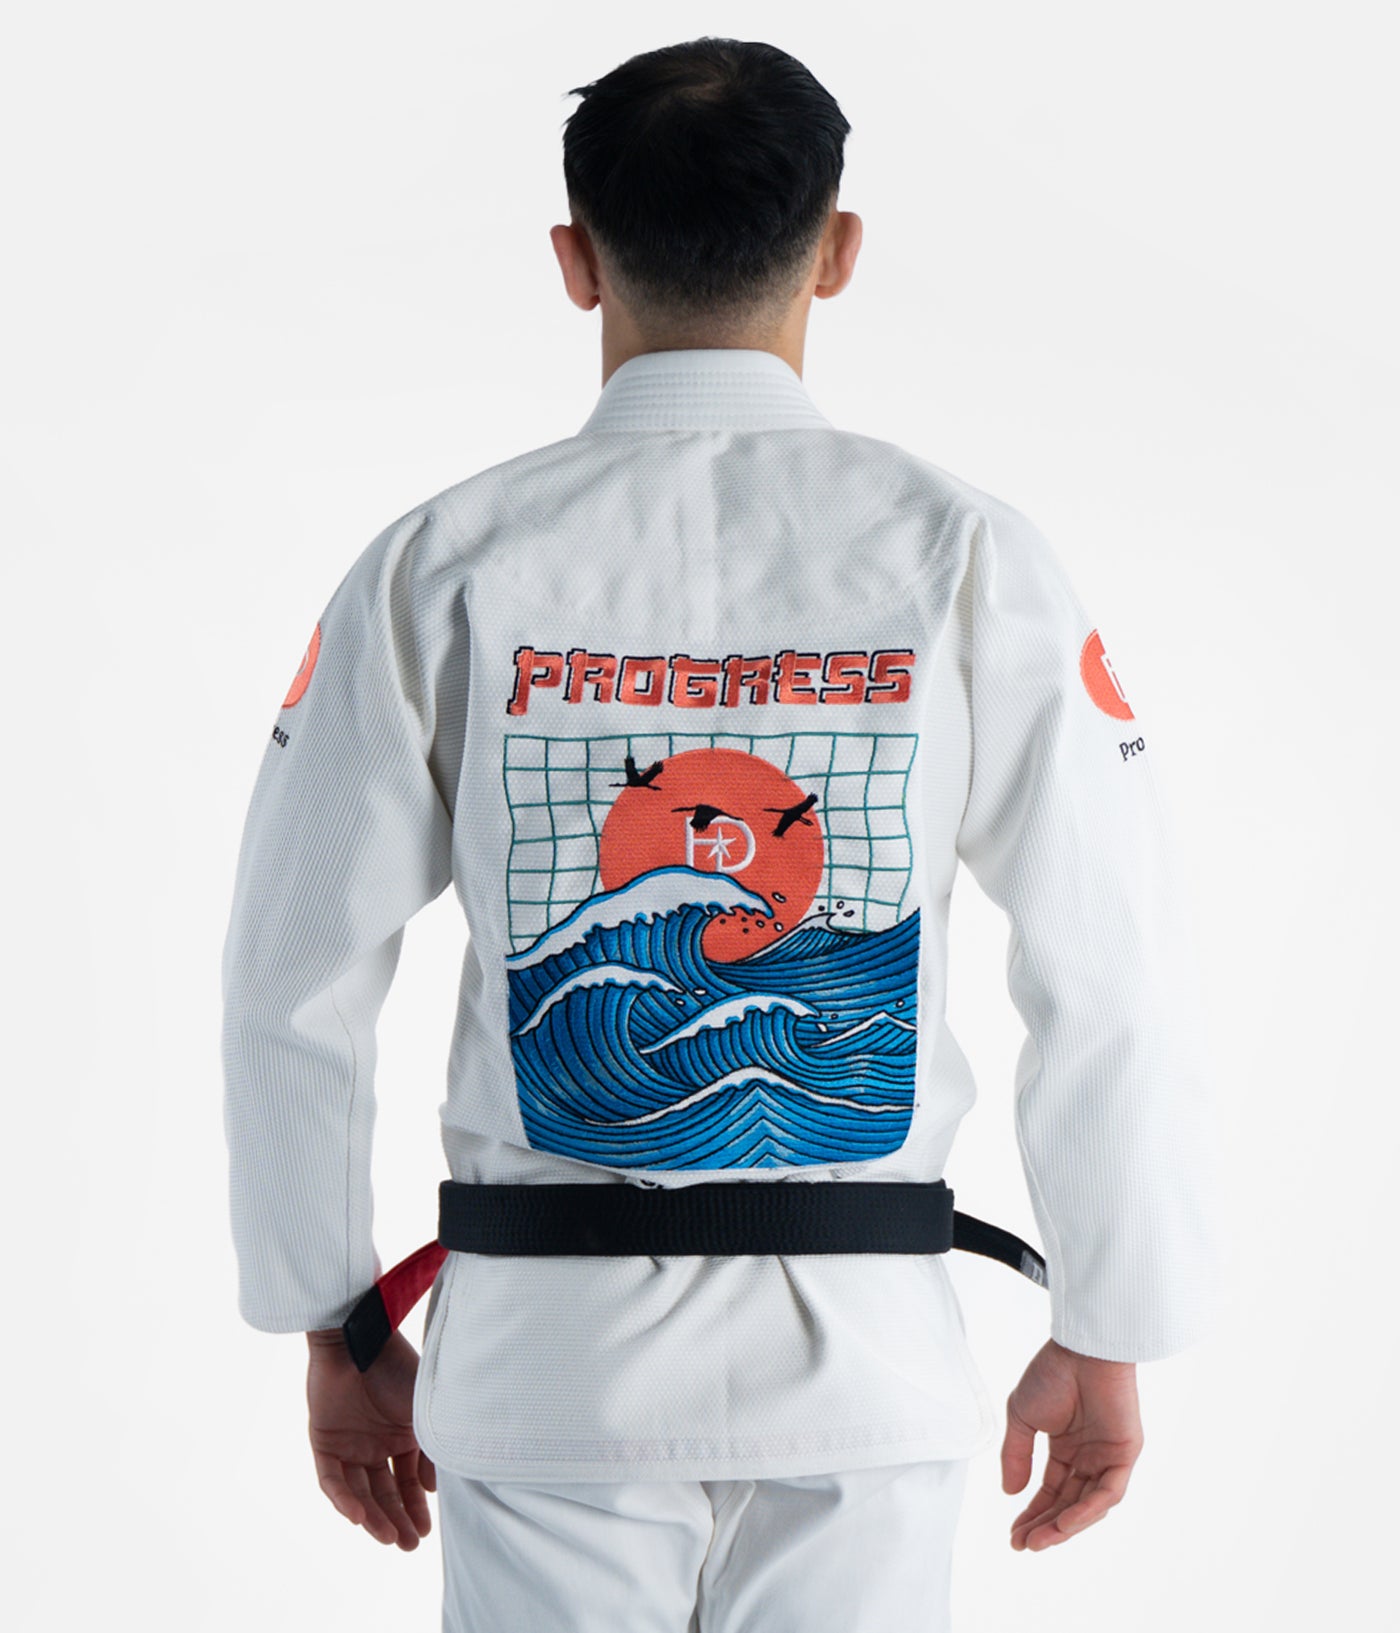 Why choose the Unknown Great Wave Gi?